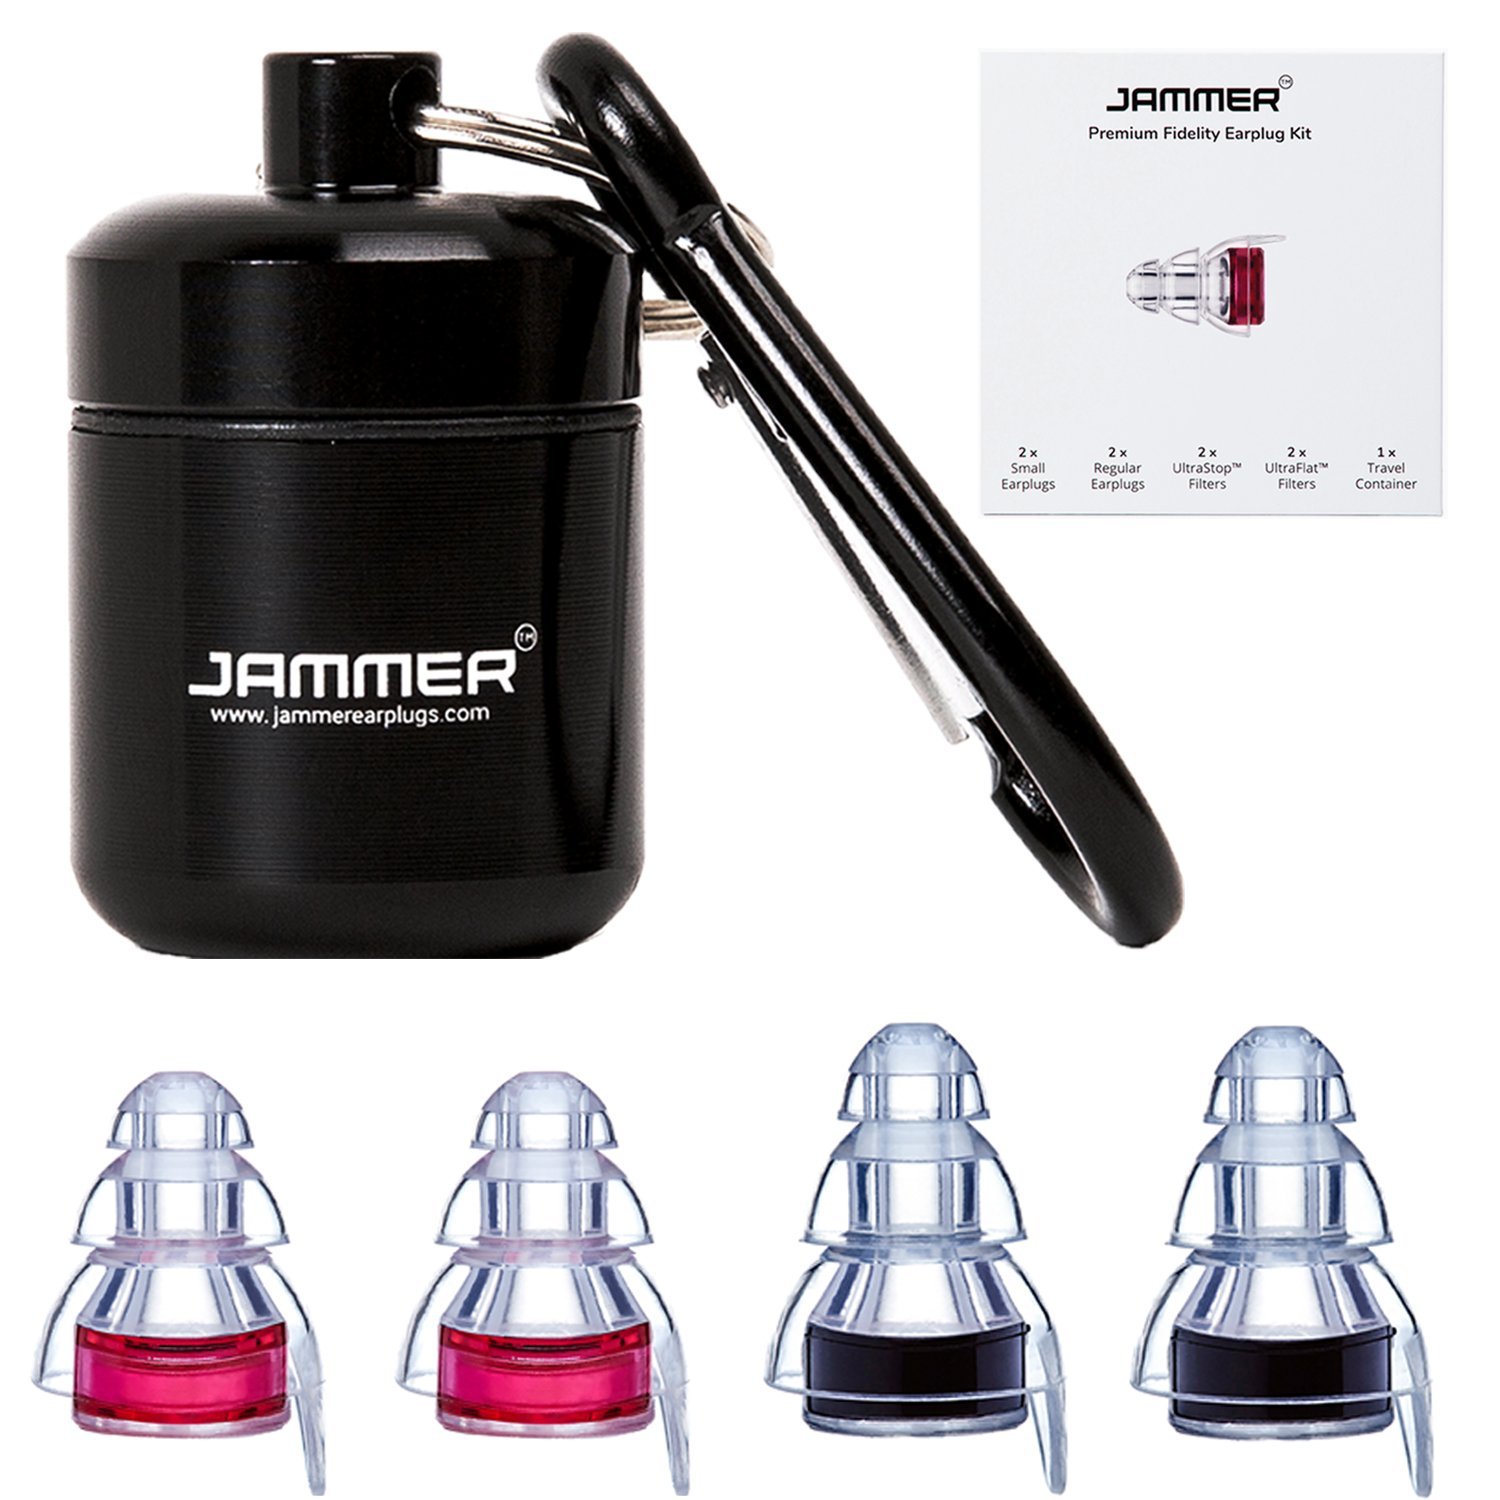 Jammer Premium Earplug Kit for Concerts Musicians Bands DJs Nightclubs Motorcycles Sleeping - High Fidelity Noise Reduction - Noise Cancelling - Reusa 2